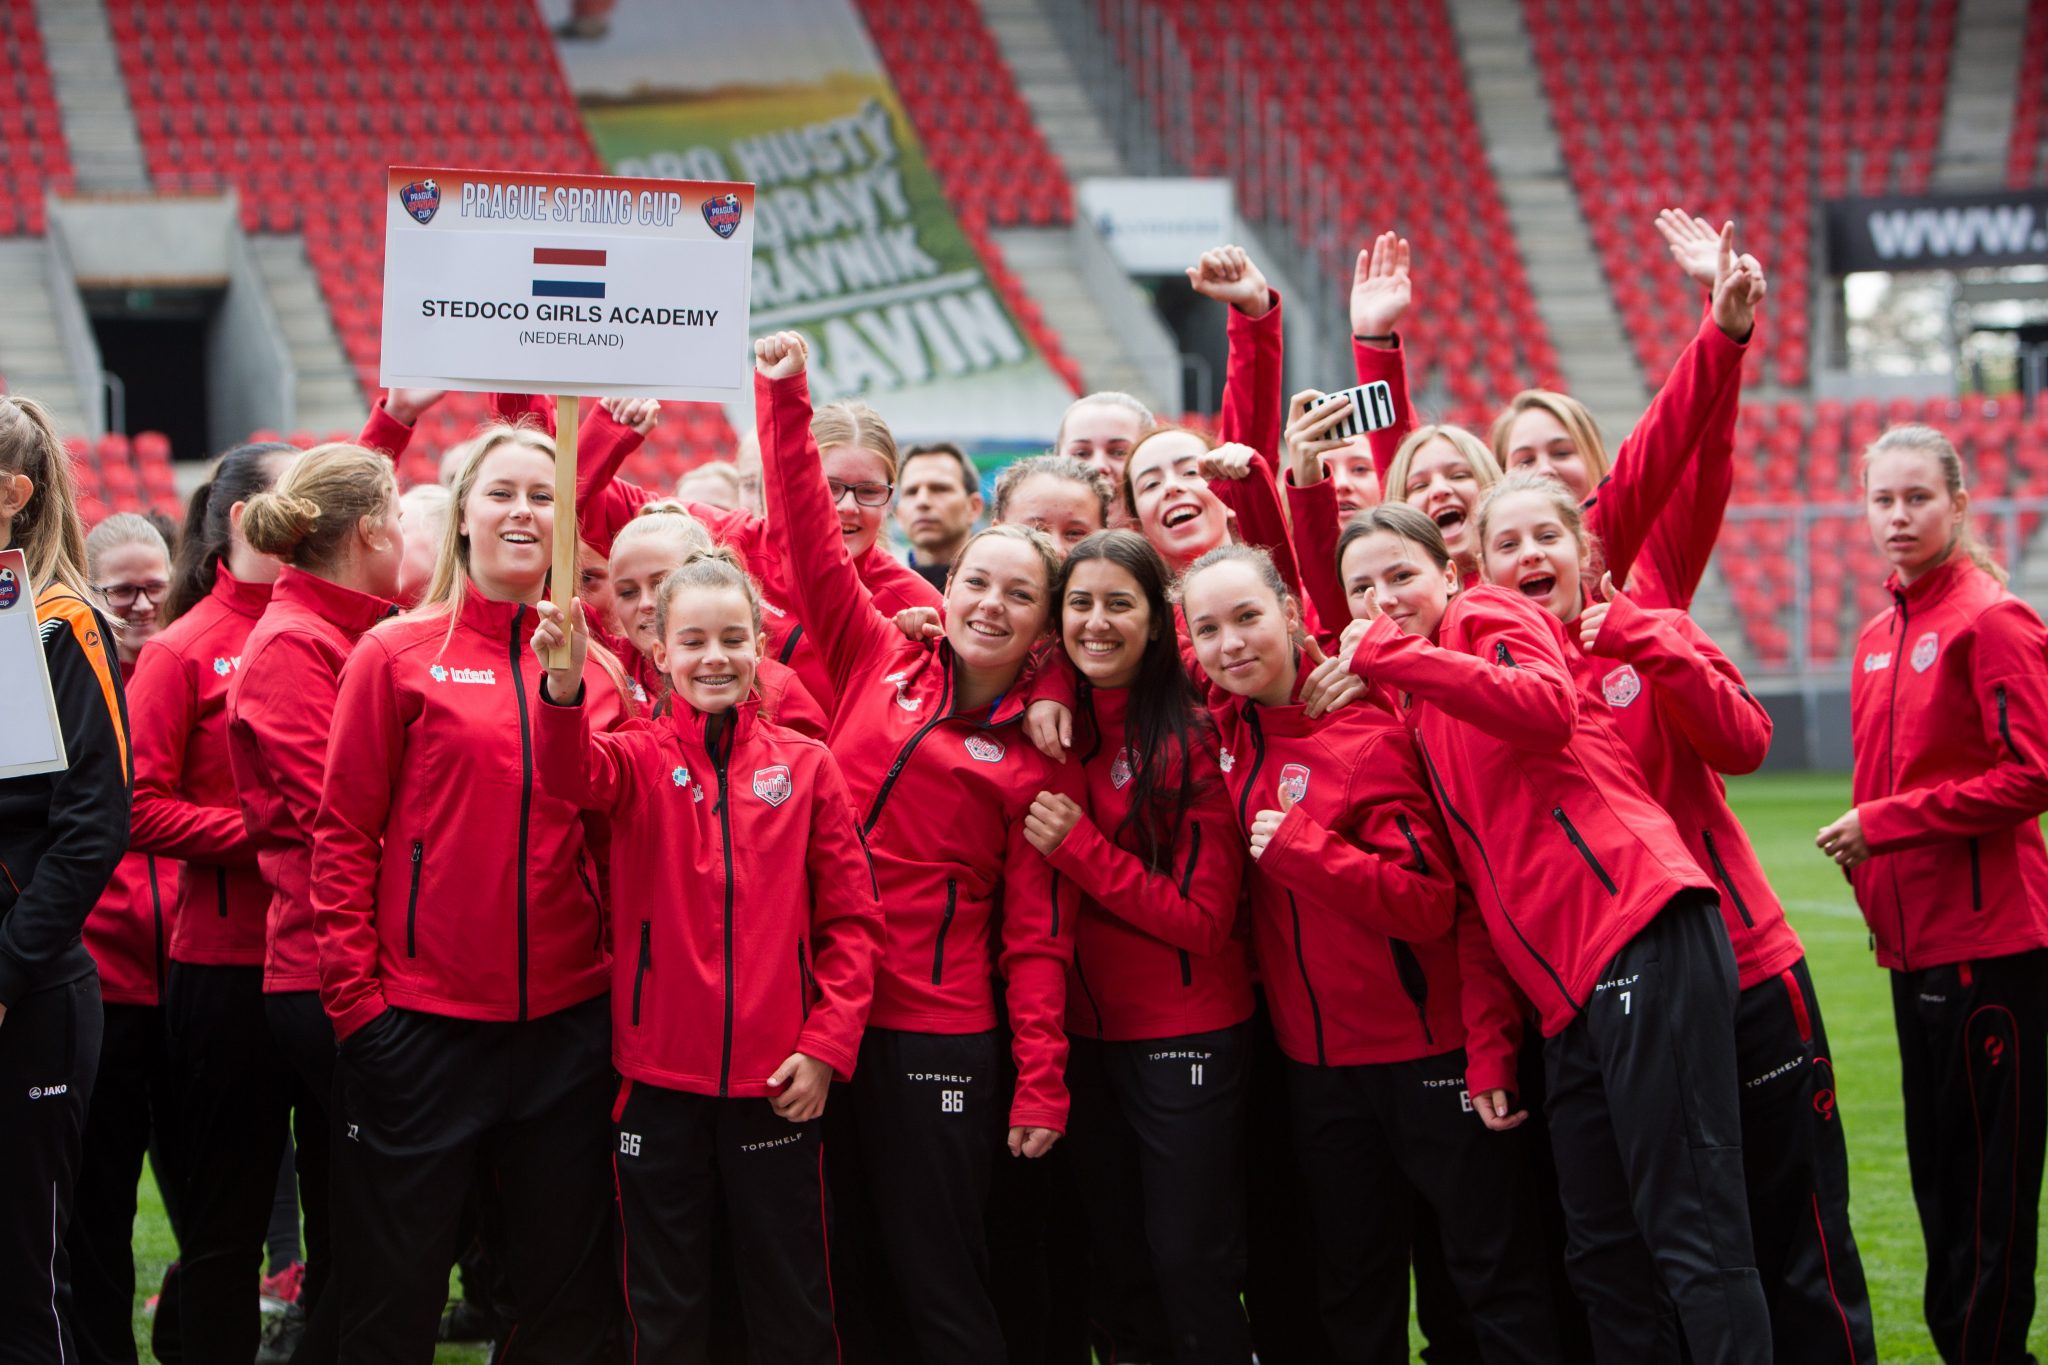 Prague Cup - Stedoco Girls Academy - Road to Sport